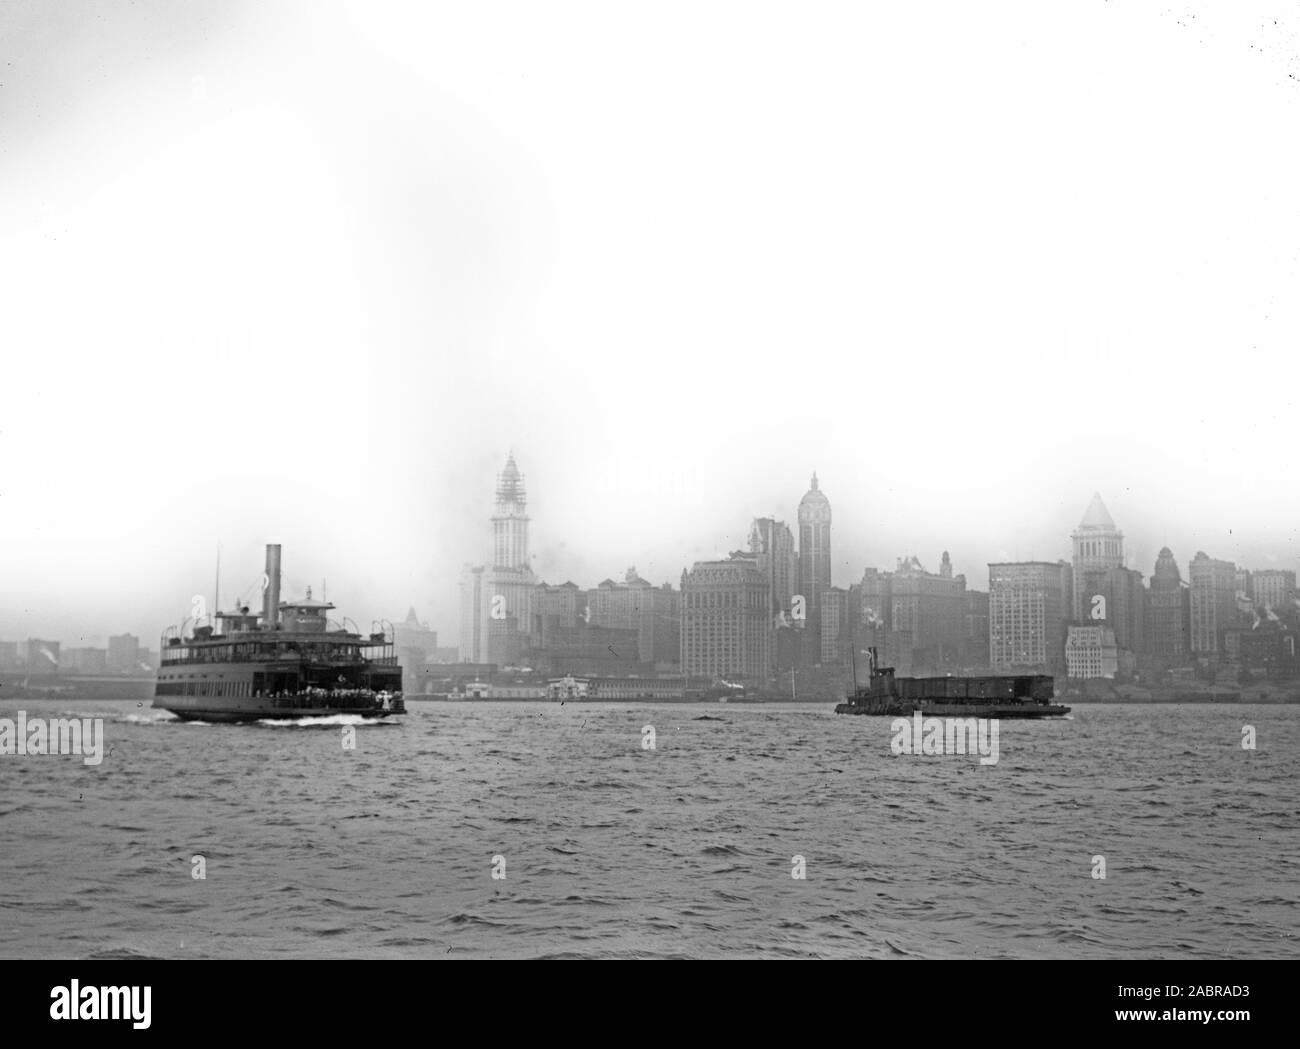 Photo shows Lower Manhattan, New York City, with ferry in foreground. Identified buildings include (from left): Woolworth Building (with tower nearing completion), Hudson Terminal, West Street Building, City Investing Tower, Singer Building, U.S. Realty and Trinity buildings, United States Express Company, Bankers Trust Tower, and 47 West Street Building. Stock Photo